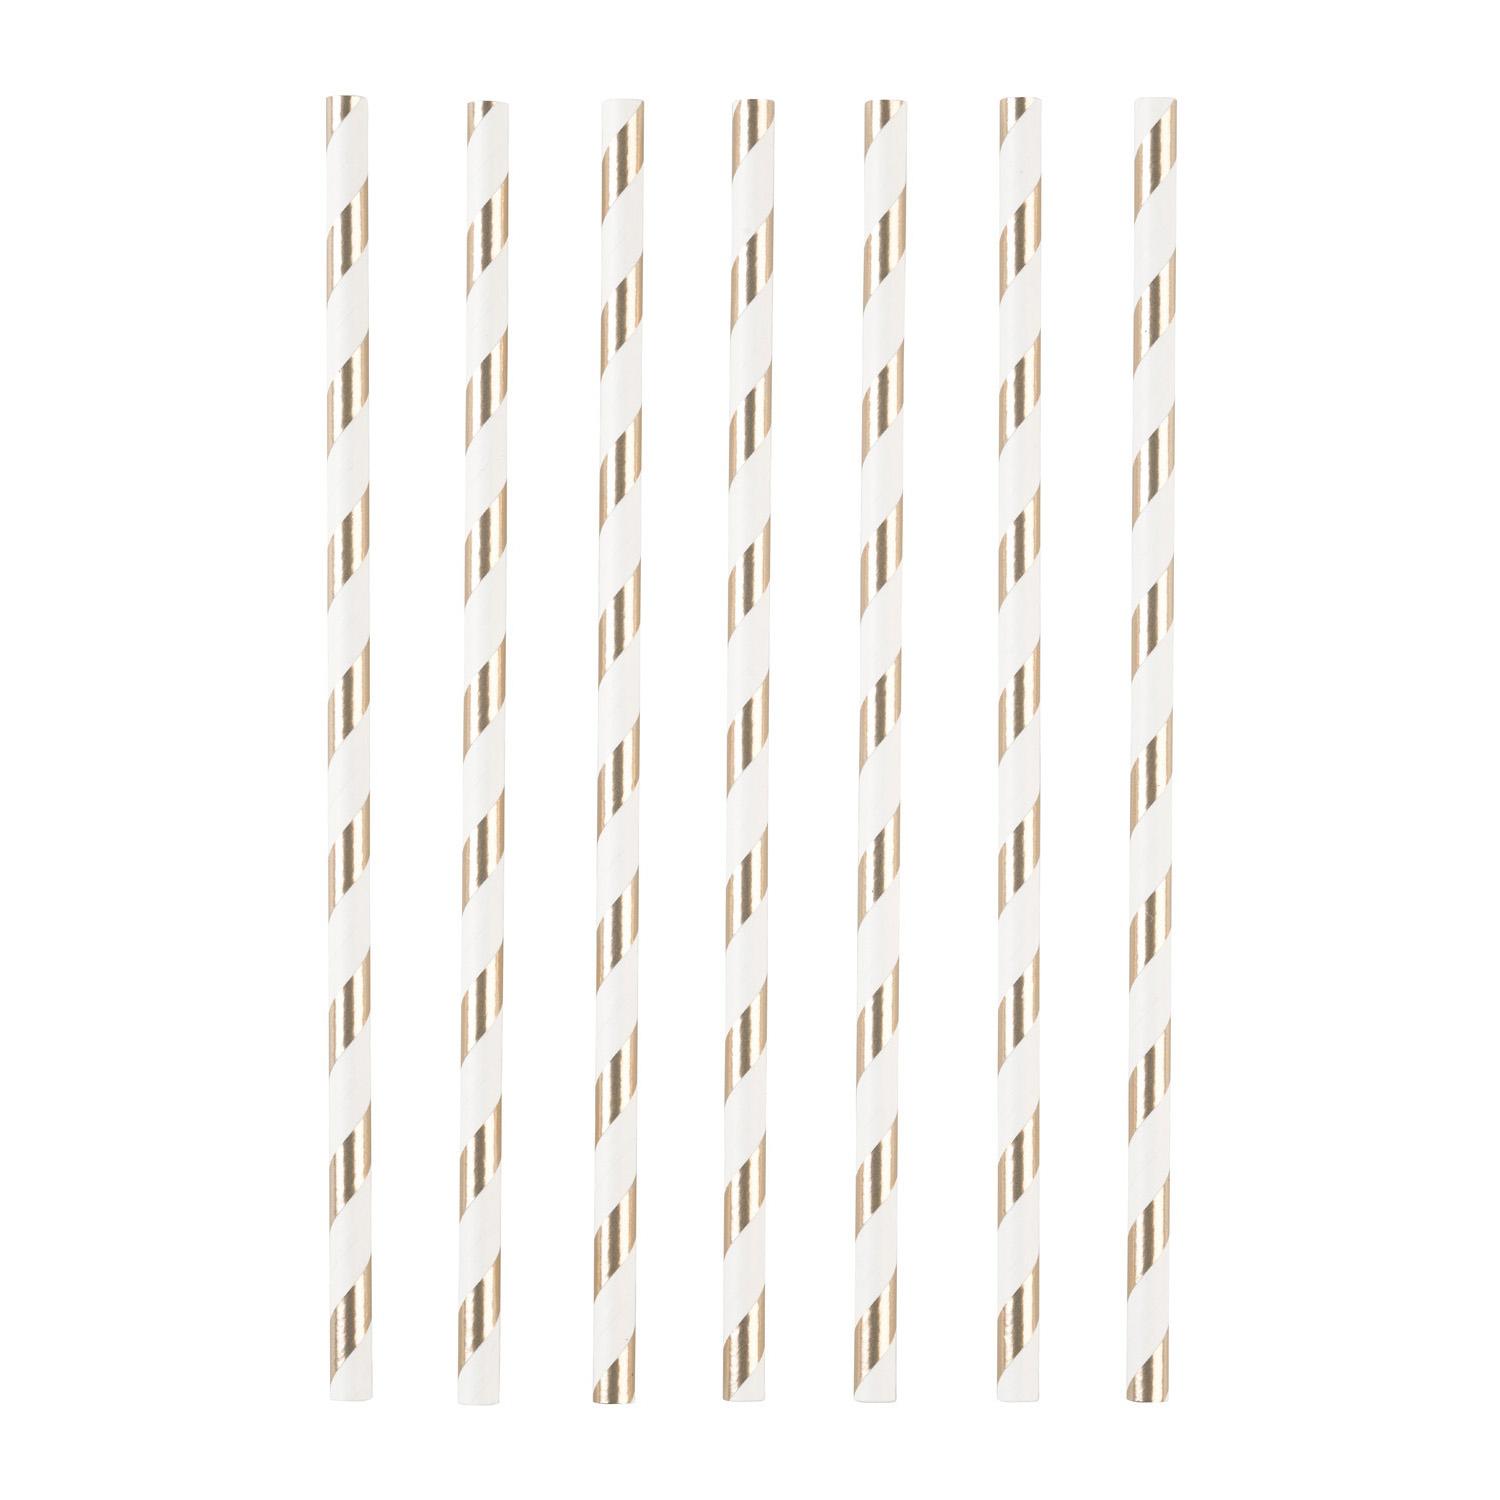 Everyday Love Paper Drinking Straws 12pcs Candy Buffet - Party Centre